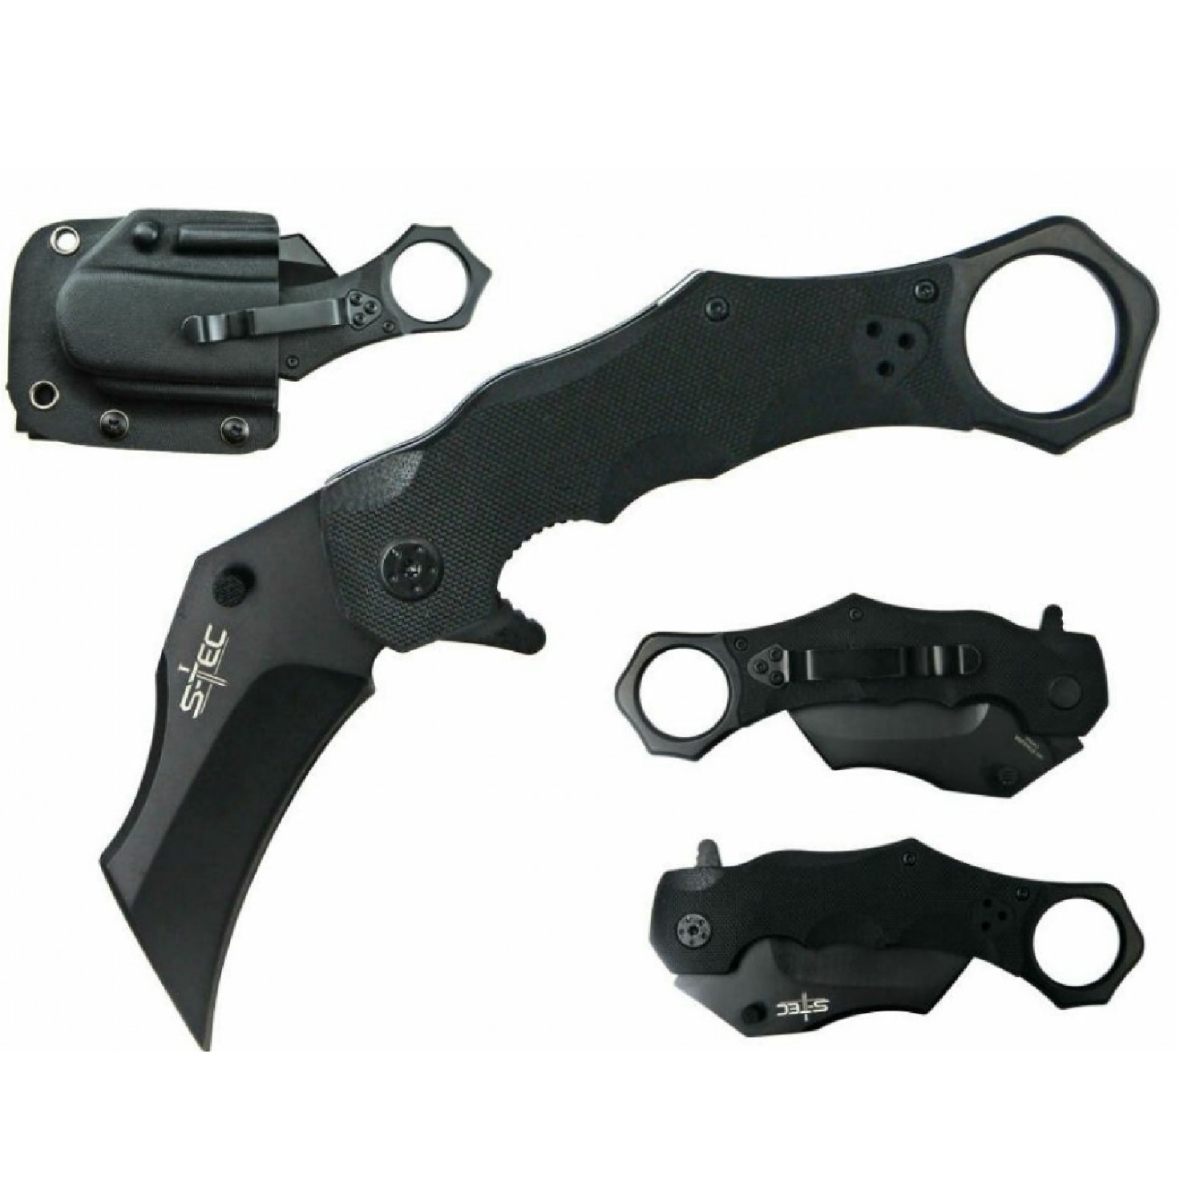 4018741 Tactical Karambit Folding Combat Knife With G10 Handle Patented Quick Release Sheath